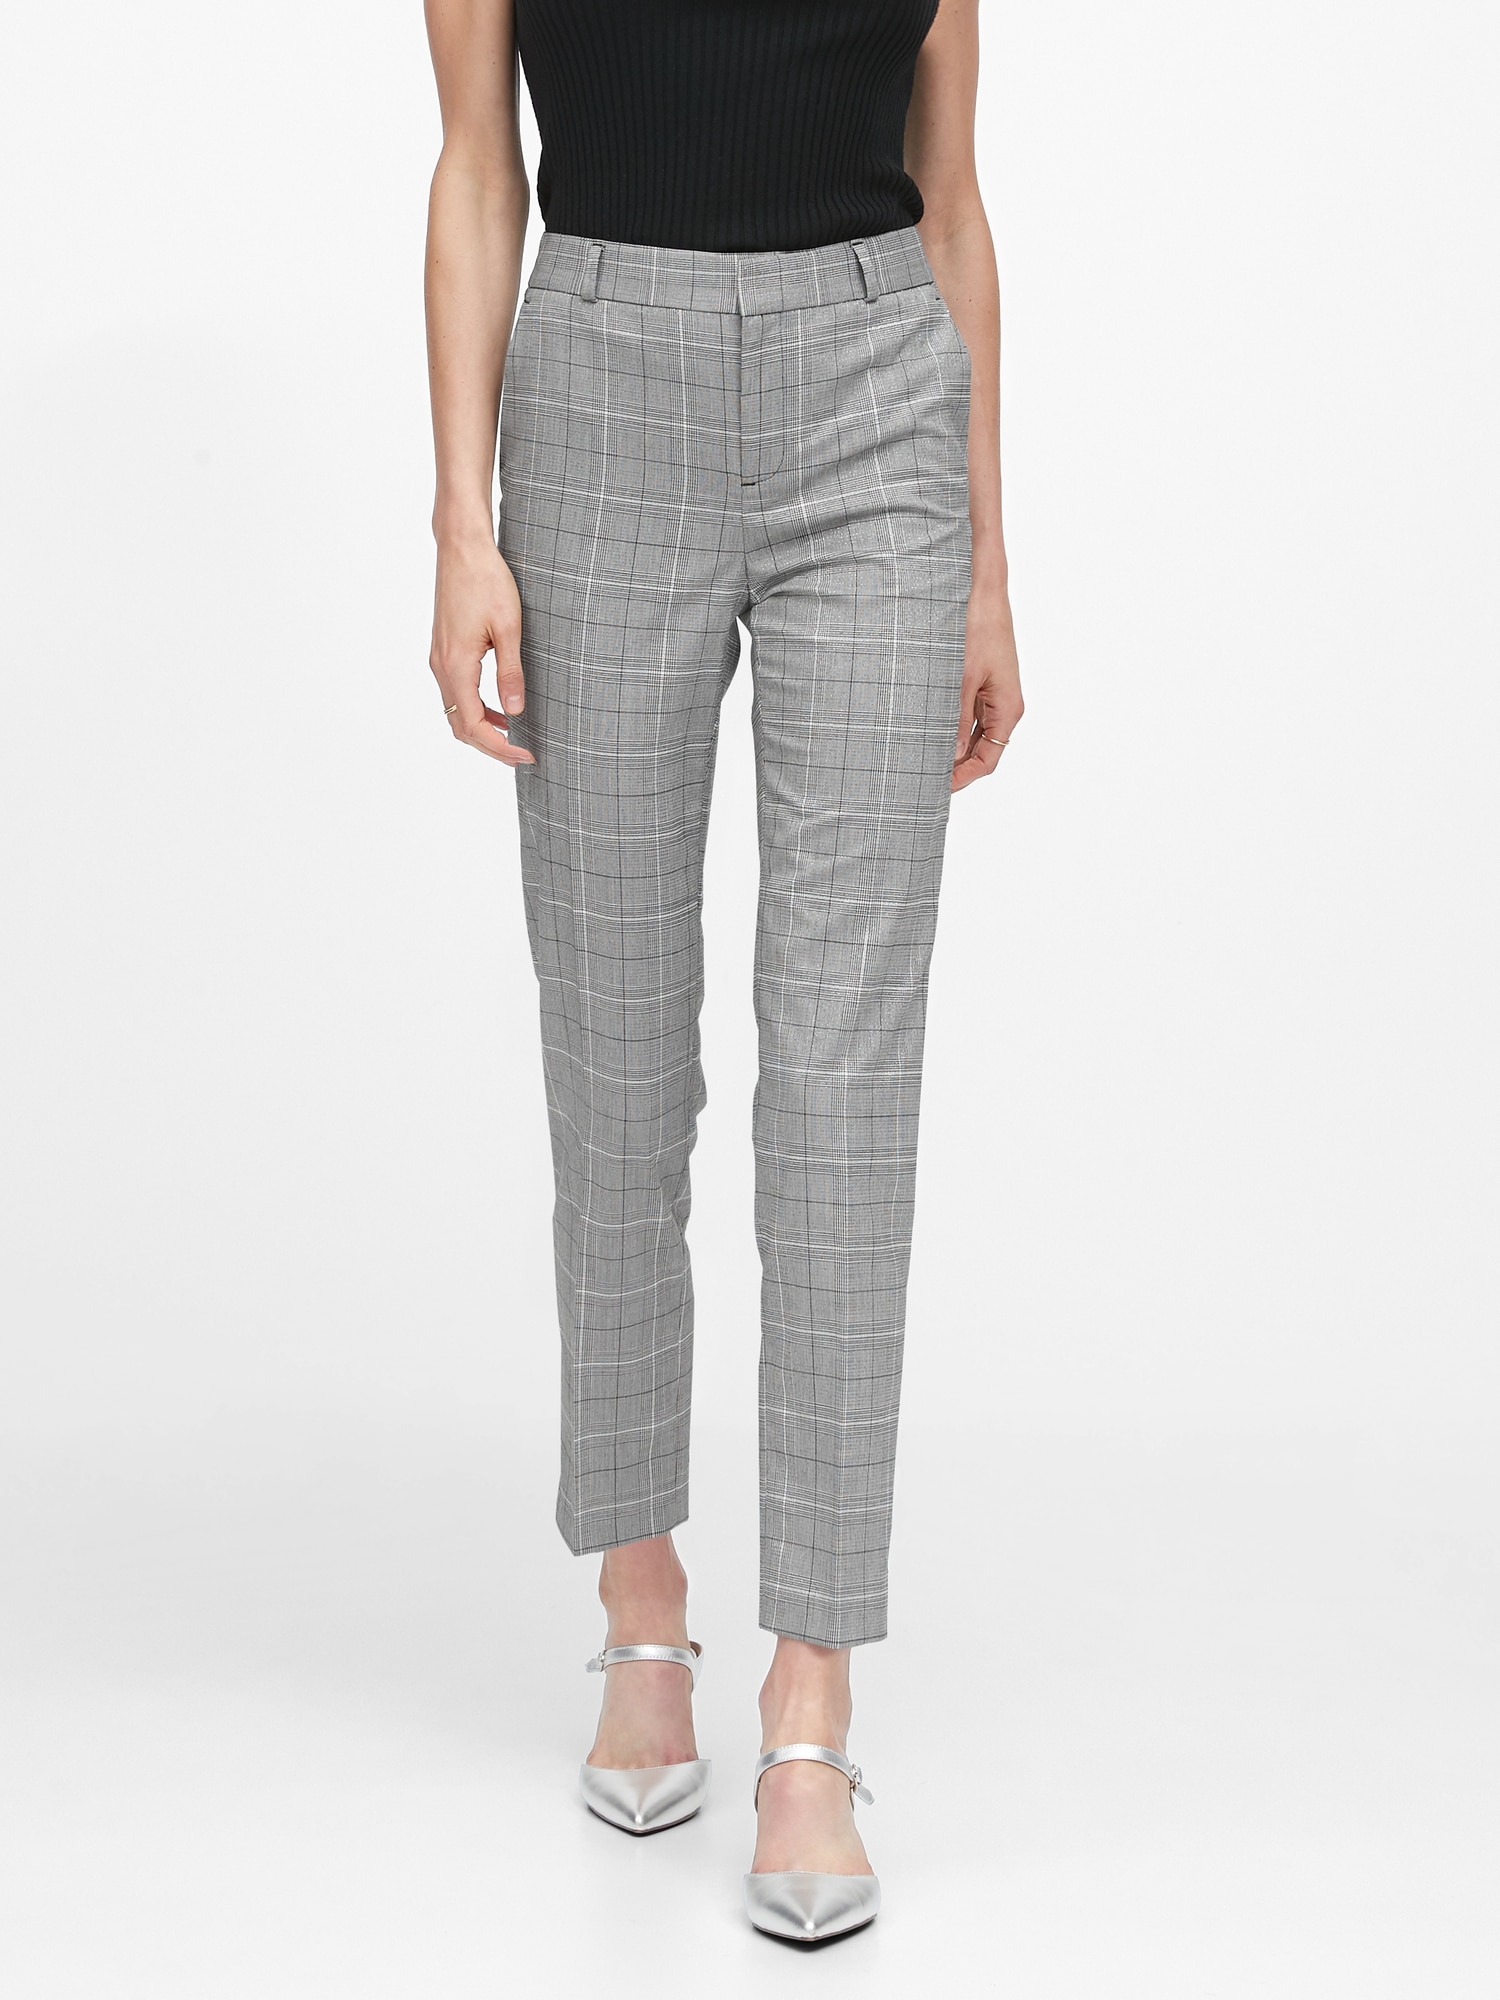 Petite Avery Straight-Fit Metallic Ankle Pant